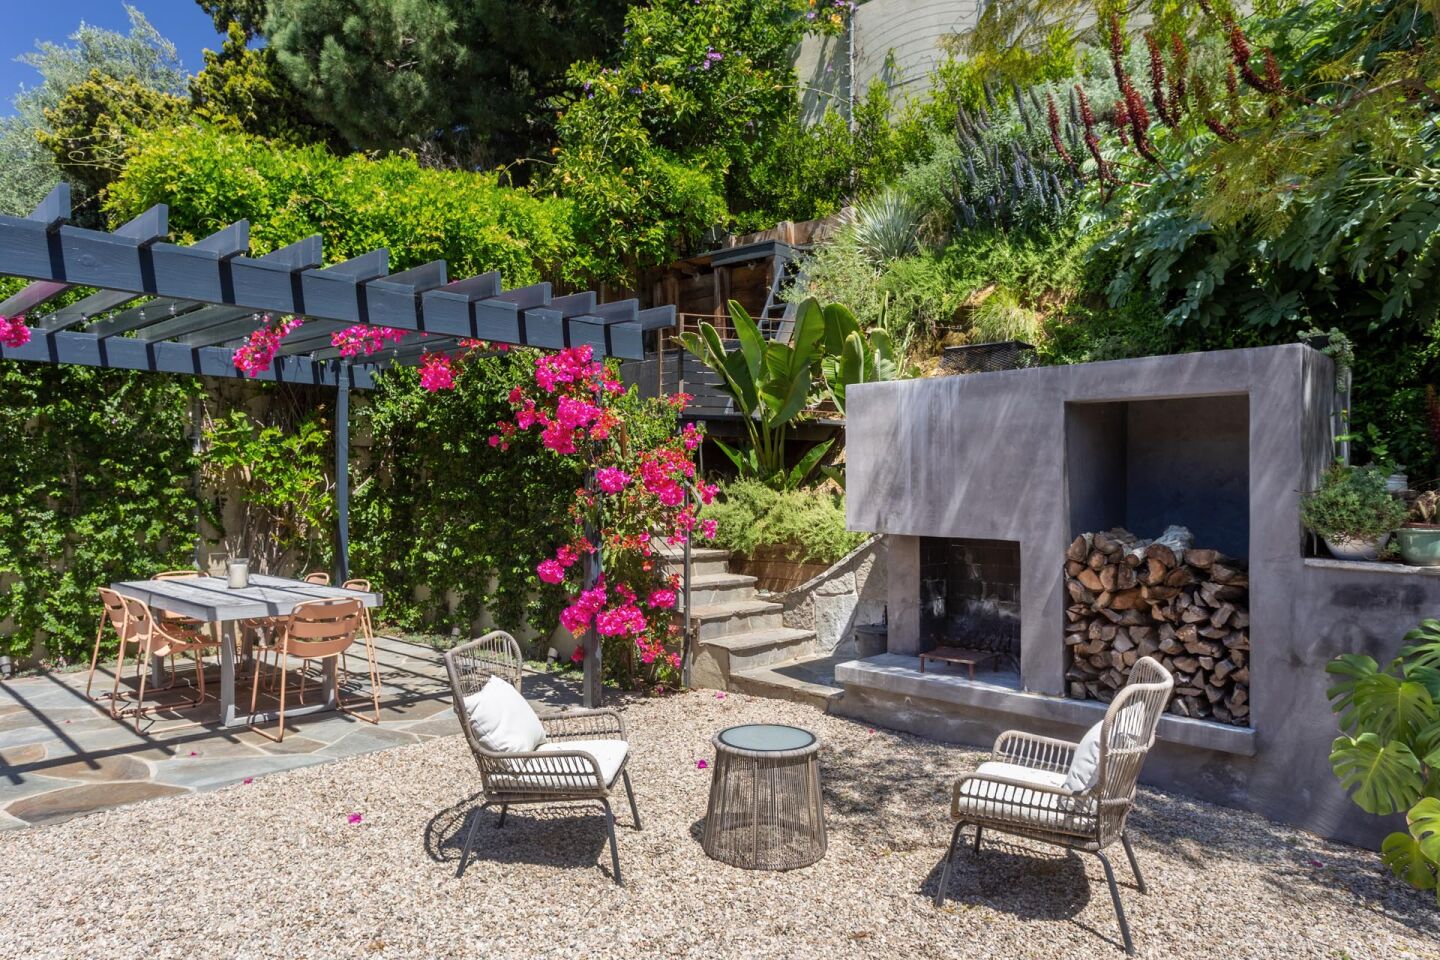 The backyard features a fireplace and a Tuscan grill.